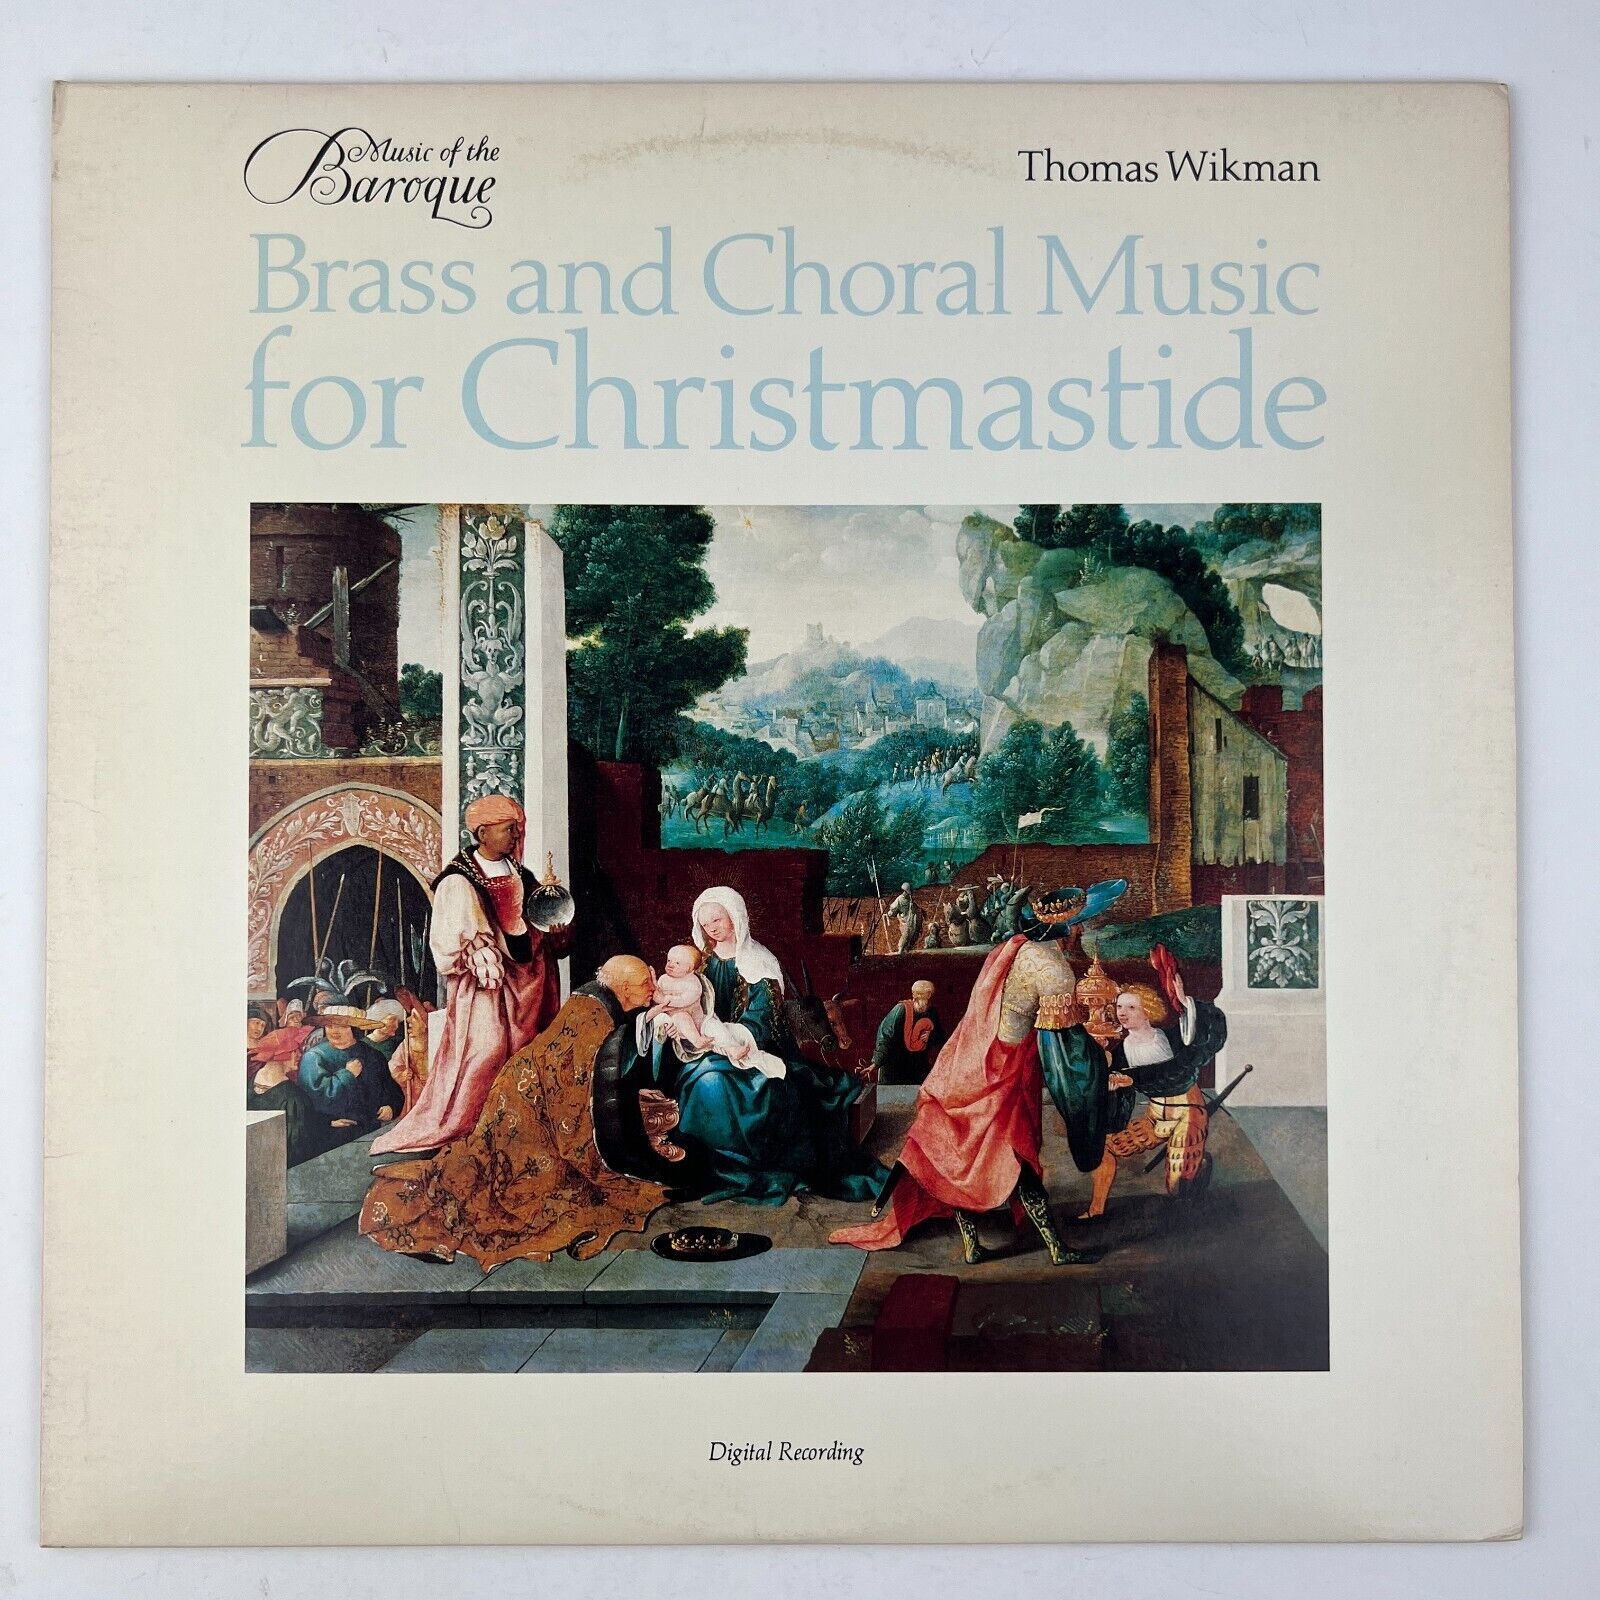 Primary image for Thomas Wikman Brass And Choral Music For Christmastide Vinyl LP Album MB 102